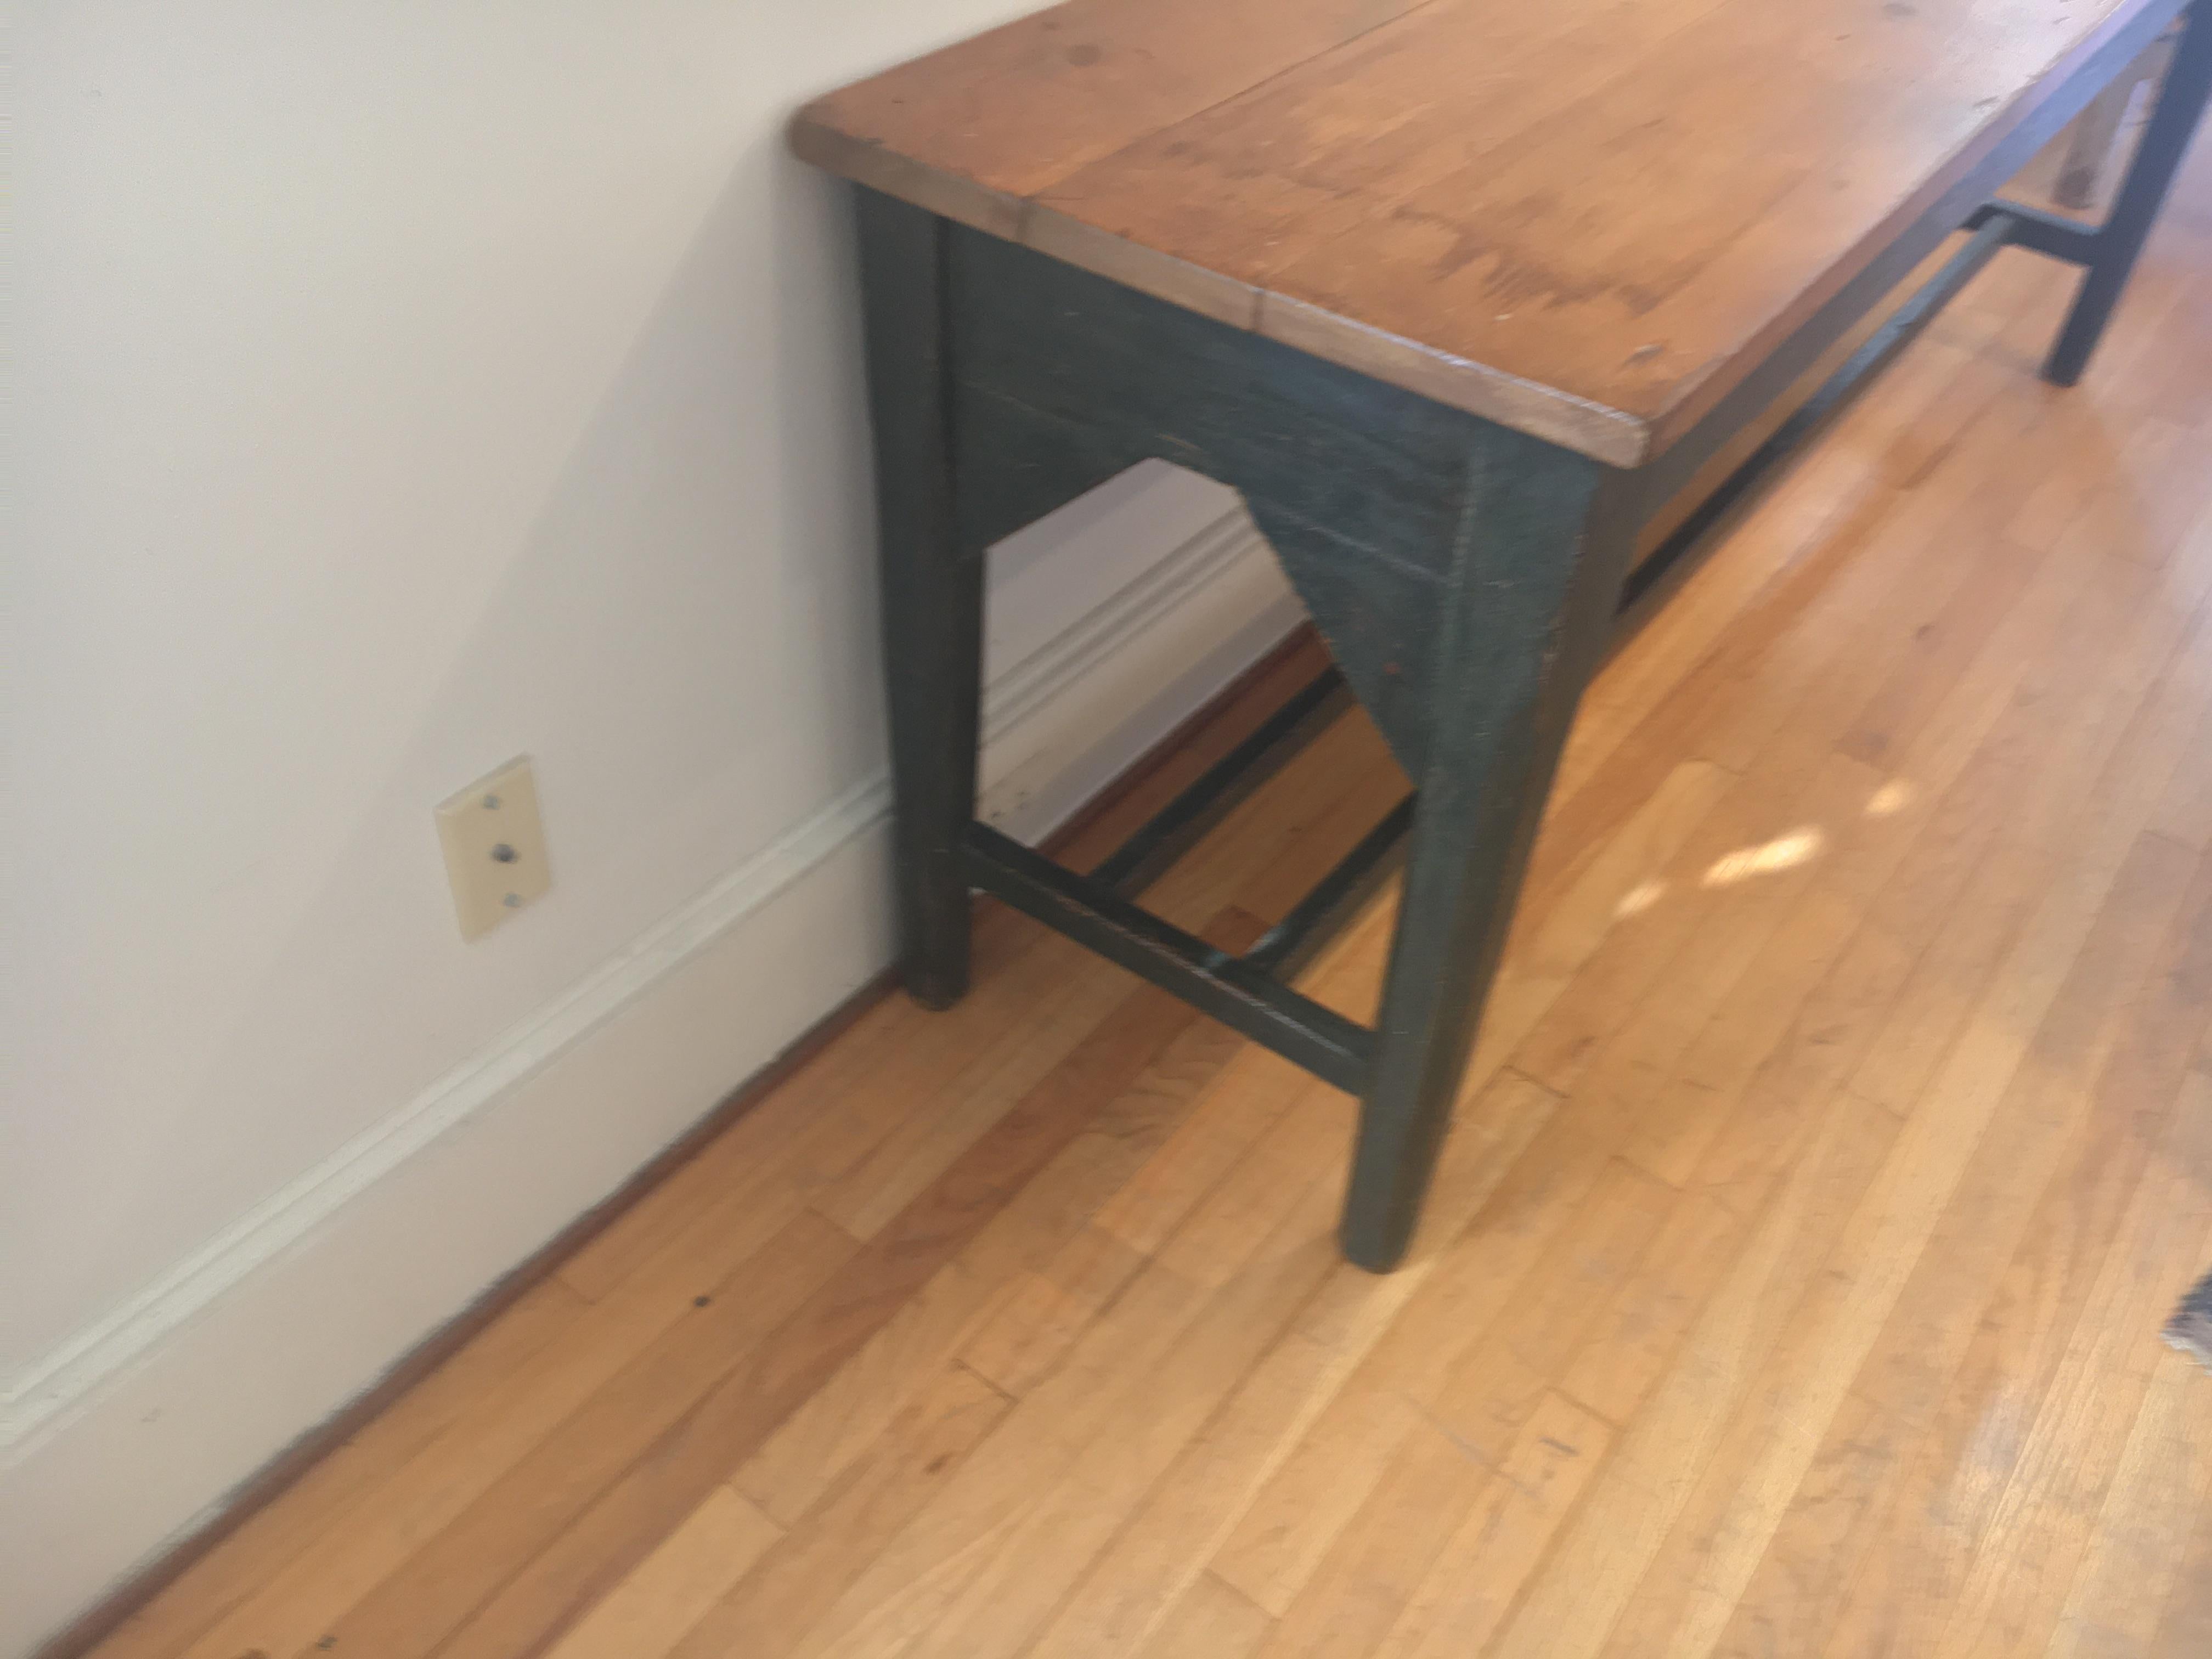 the Irish have cross stretchers on the base of many pieces and is more unusual in Canadian pieces. If you are looking for a long sideboard or long sofa table this is your piece. The deeper green color against the table top is an excellent contrast.